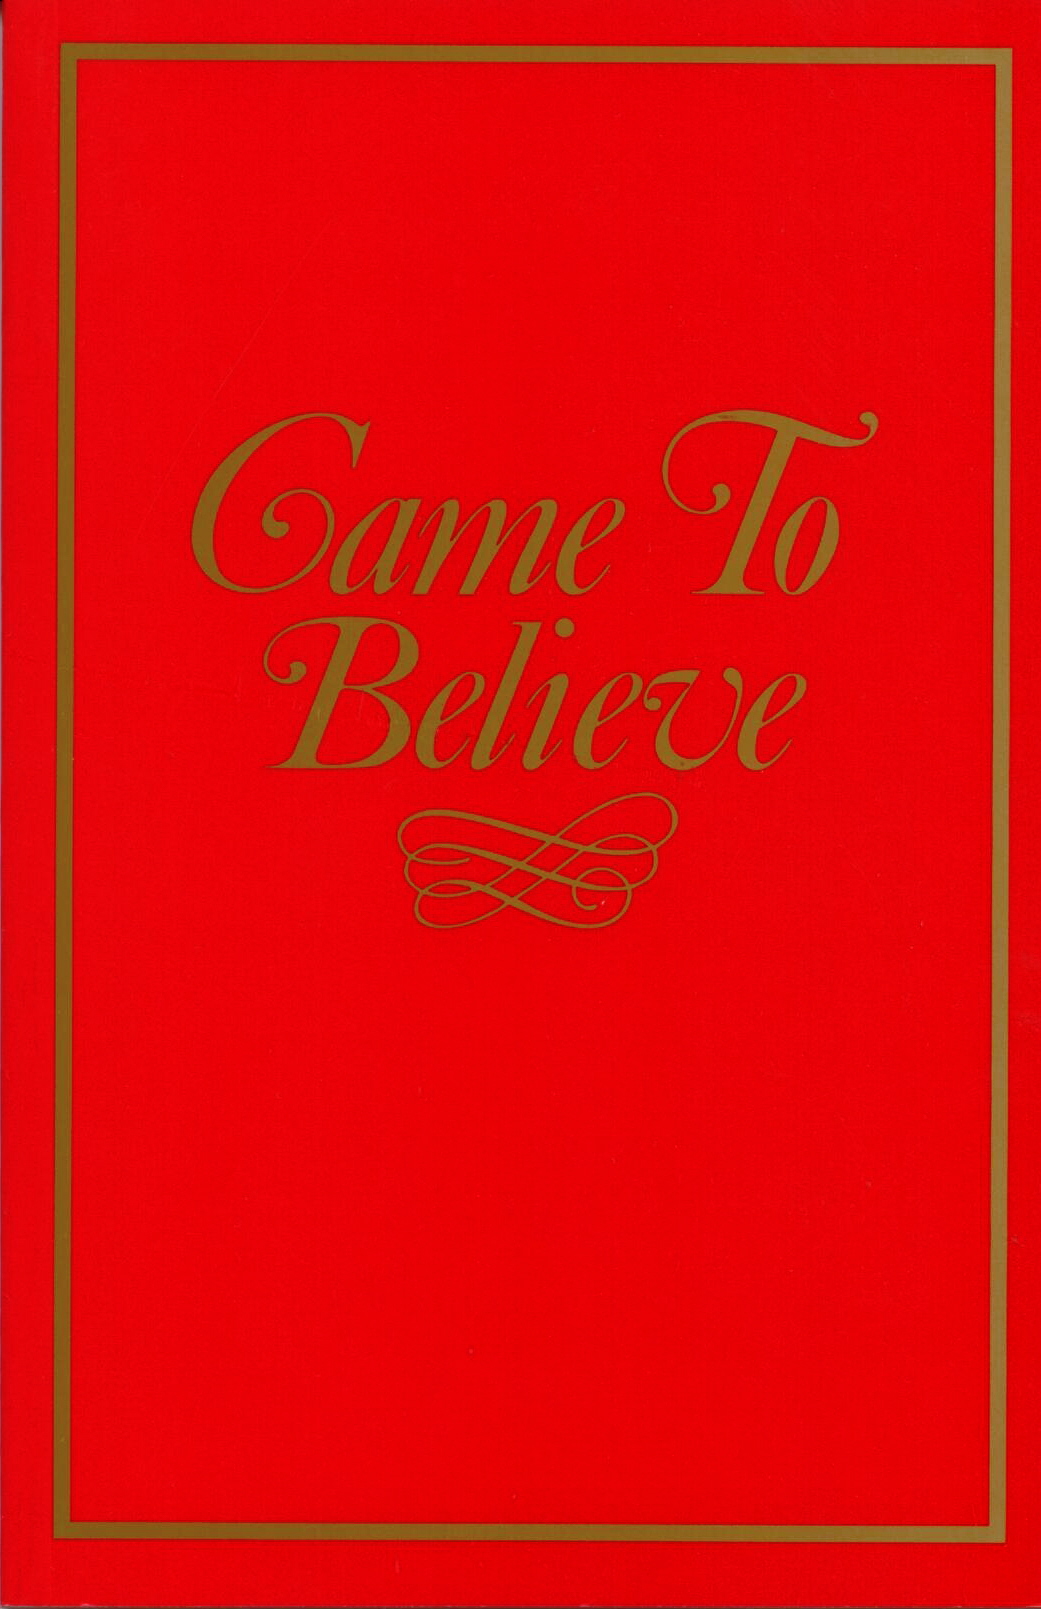 Came To Believe published by AA World Services